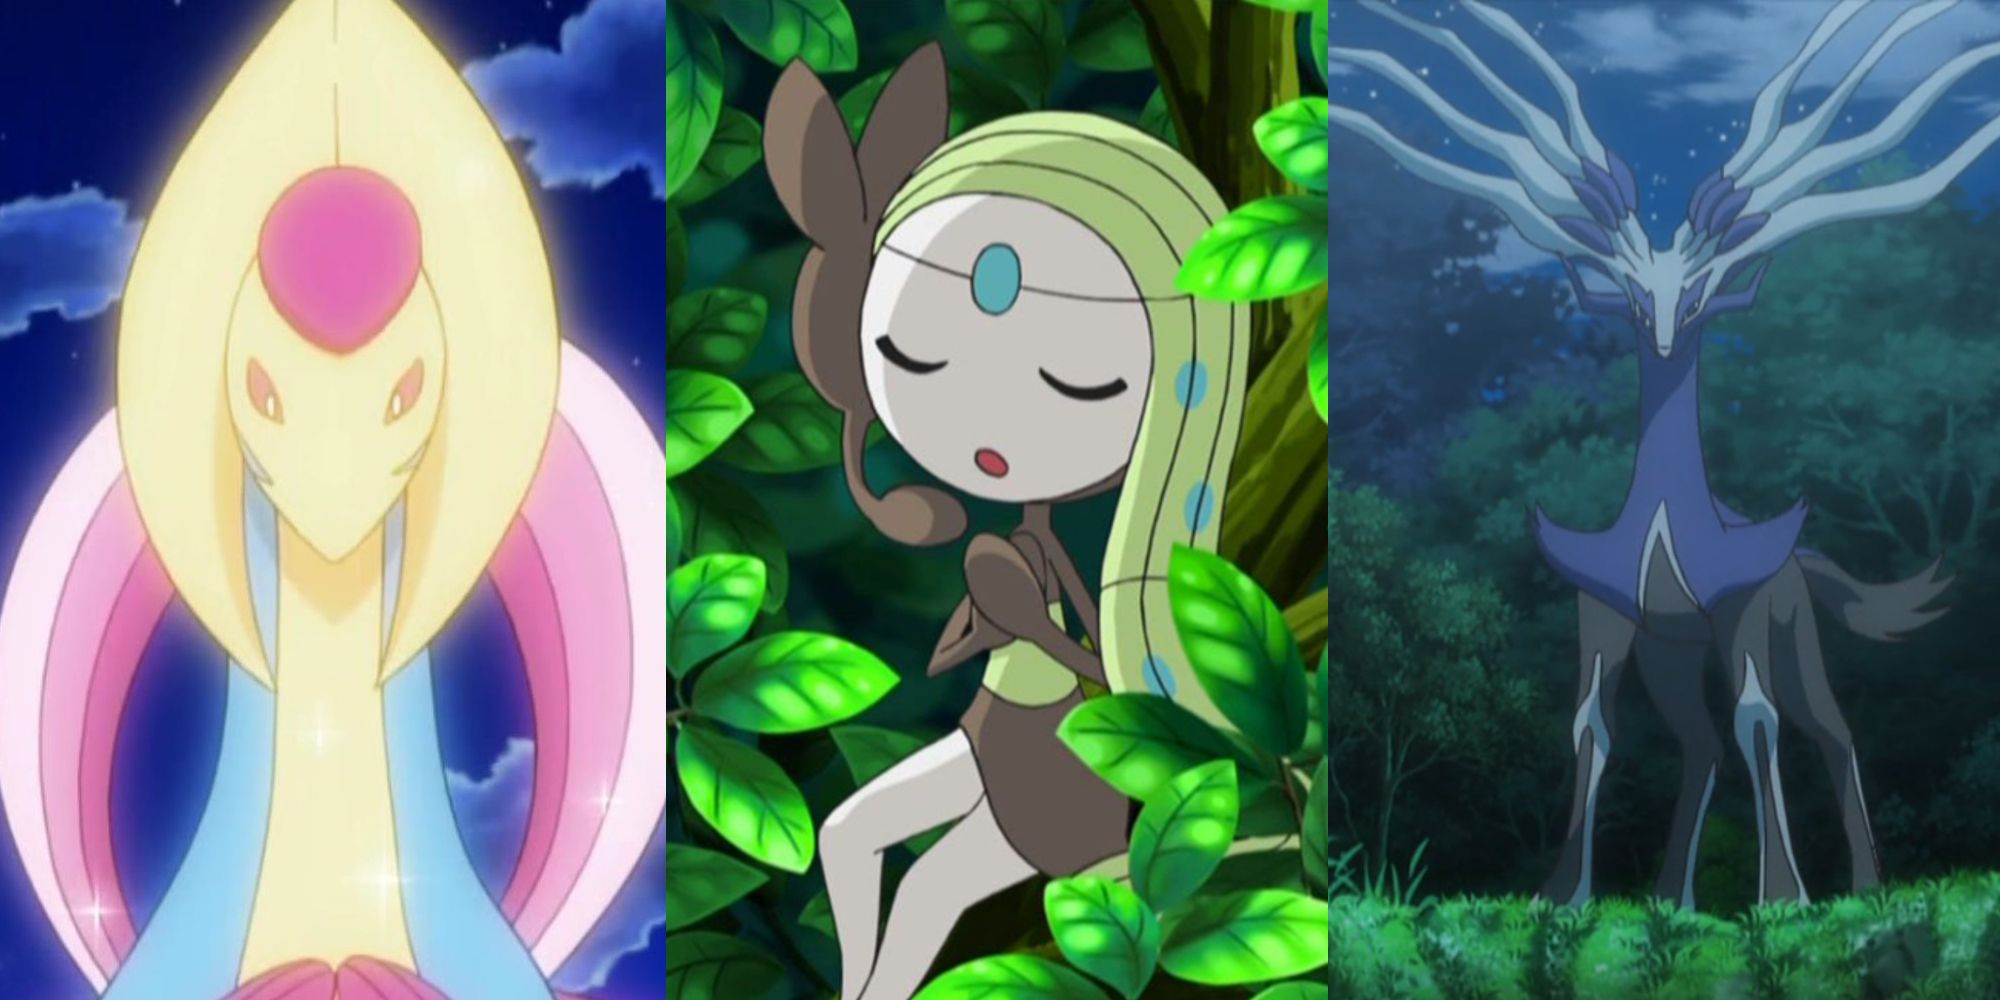 Cresselia in the anime; a singing Meloetta in the anime; an inactive Xerneas in the anime